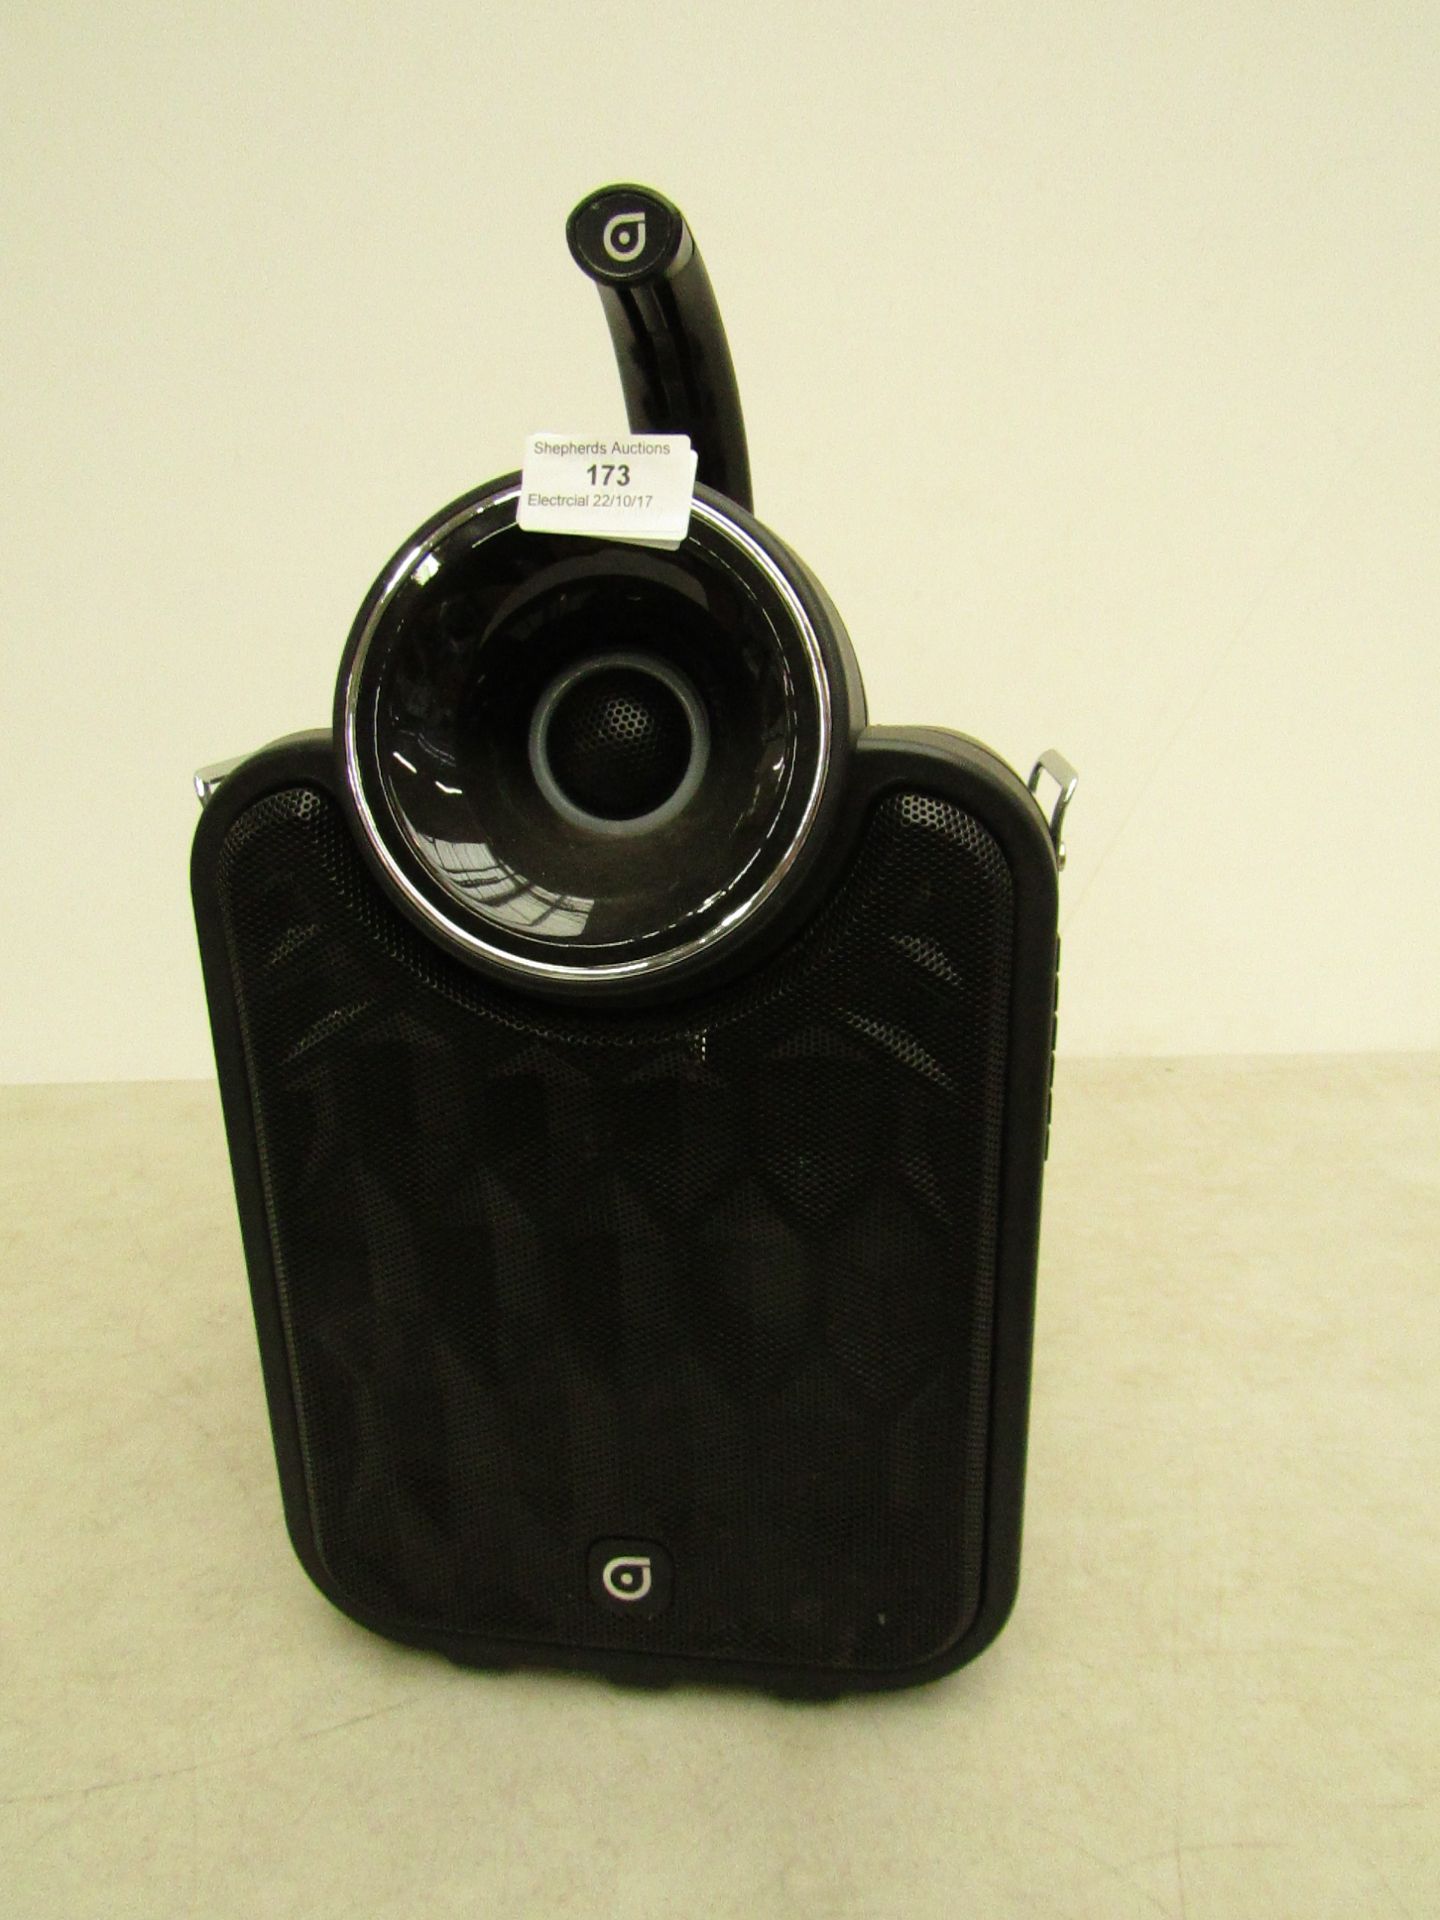 Oyility portable speaker with wireless microphone, strap and remote, tested working and boxed.